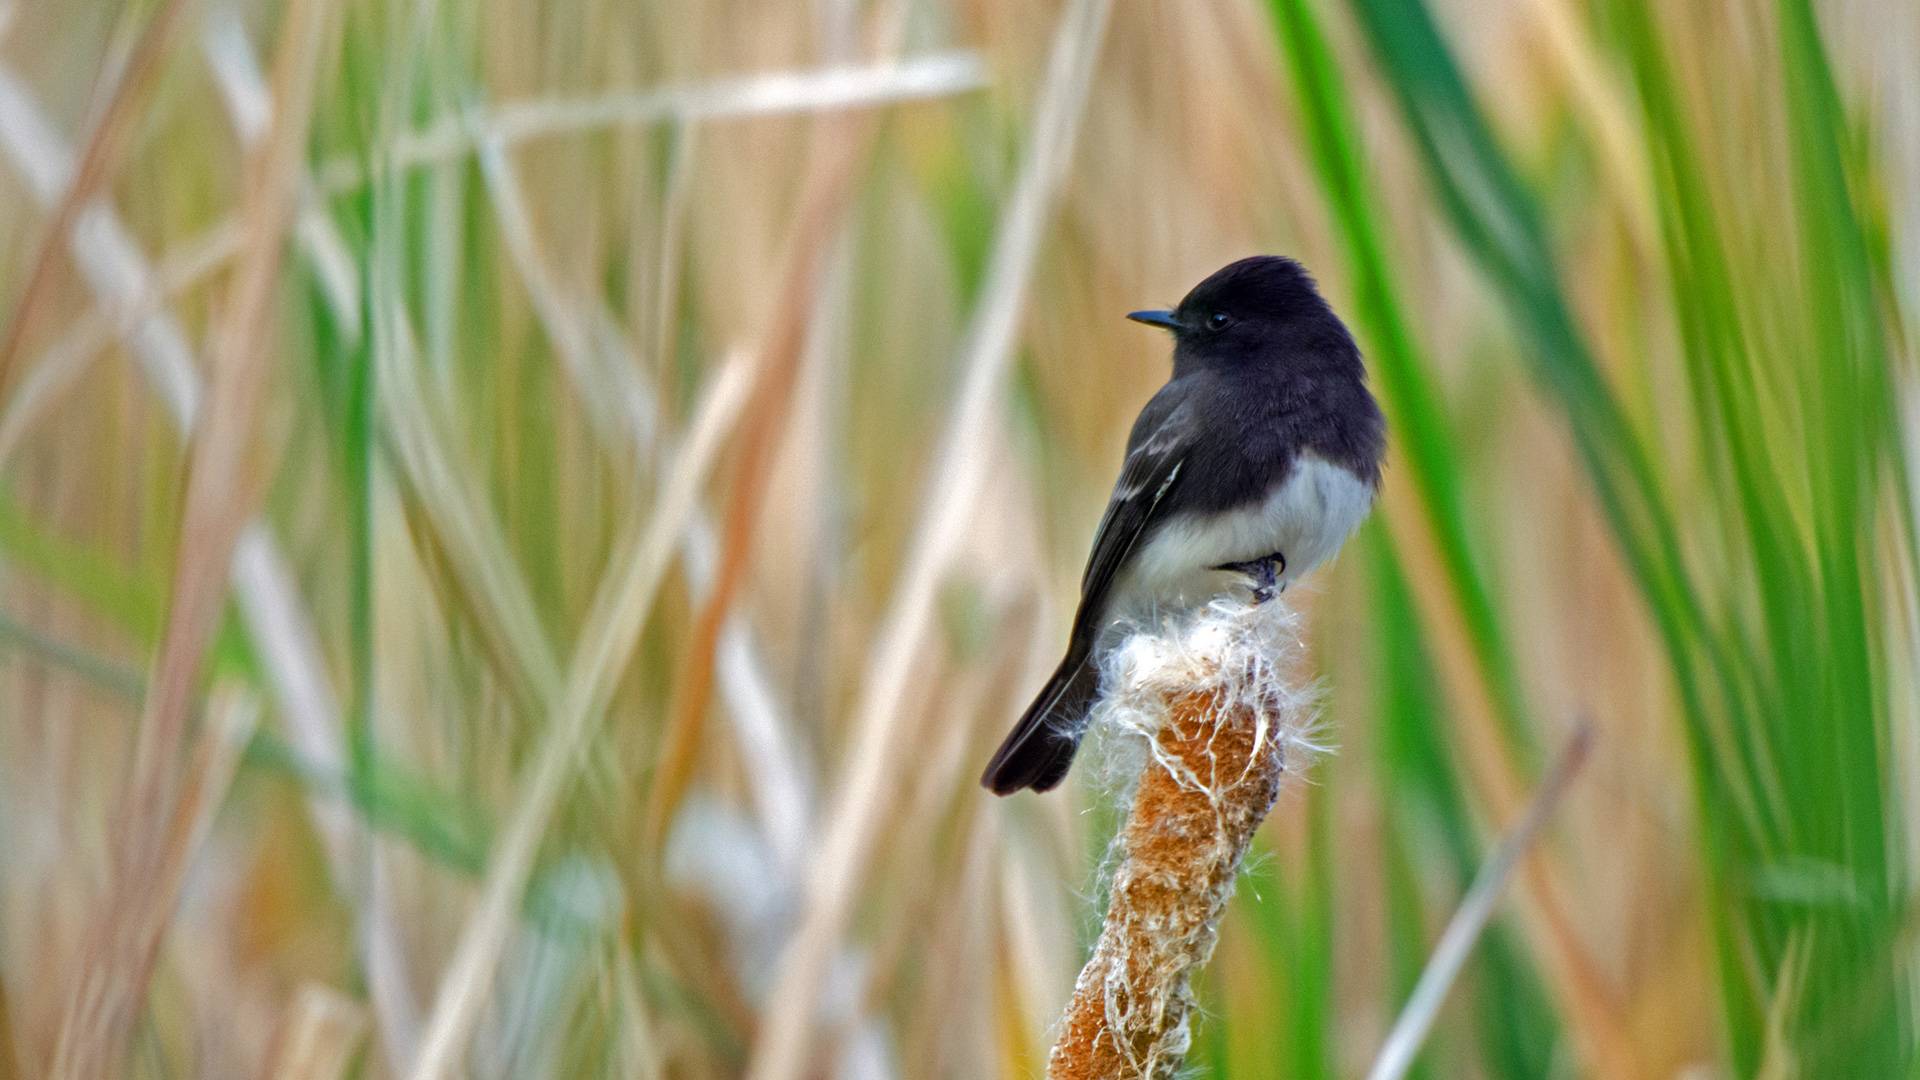 Black phoebe perched on fuzzy brown plant in front of blurred field of grasses